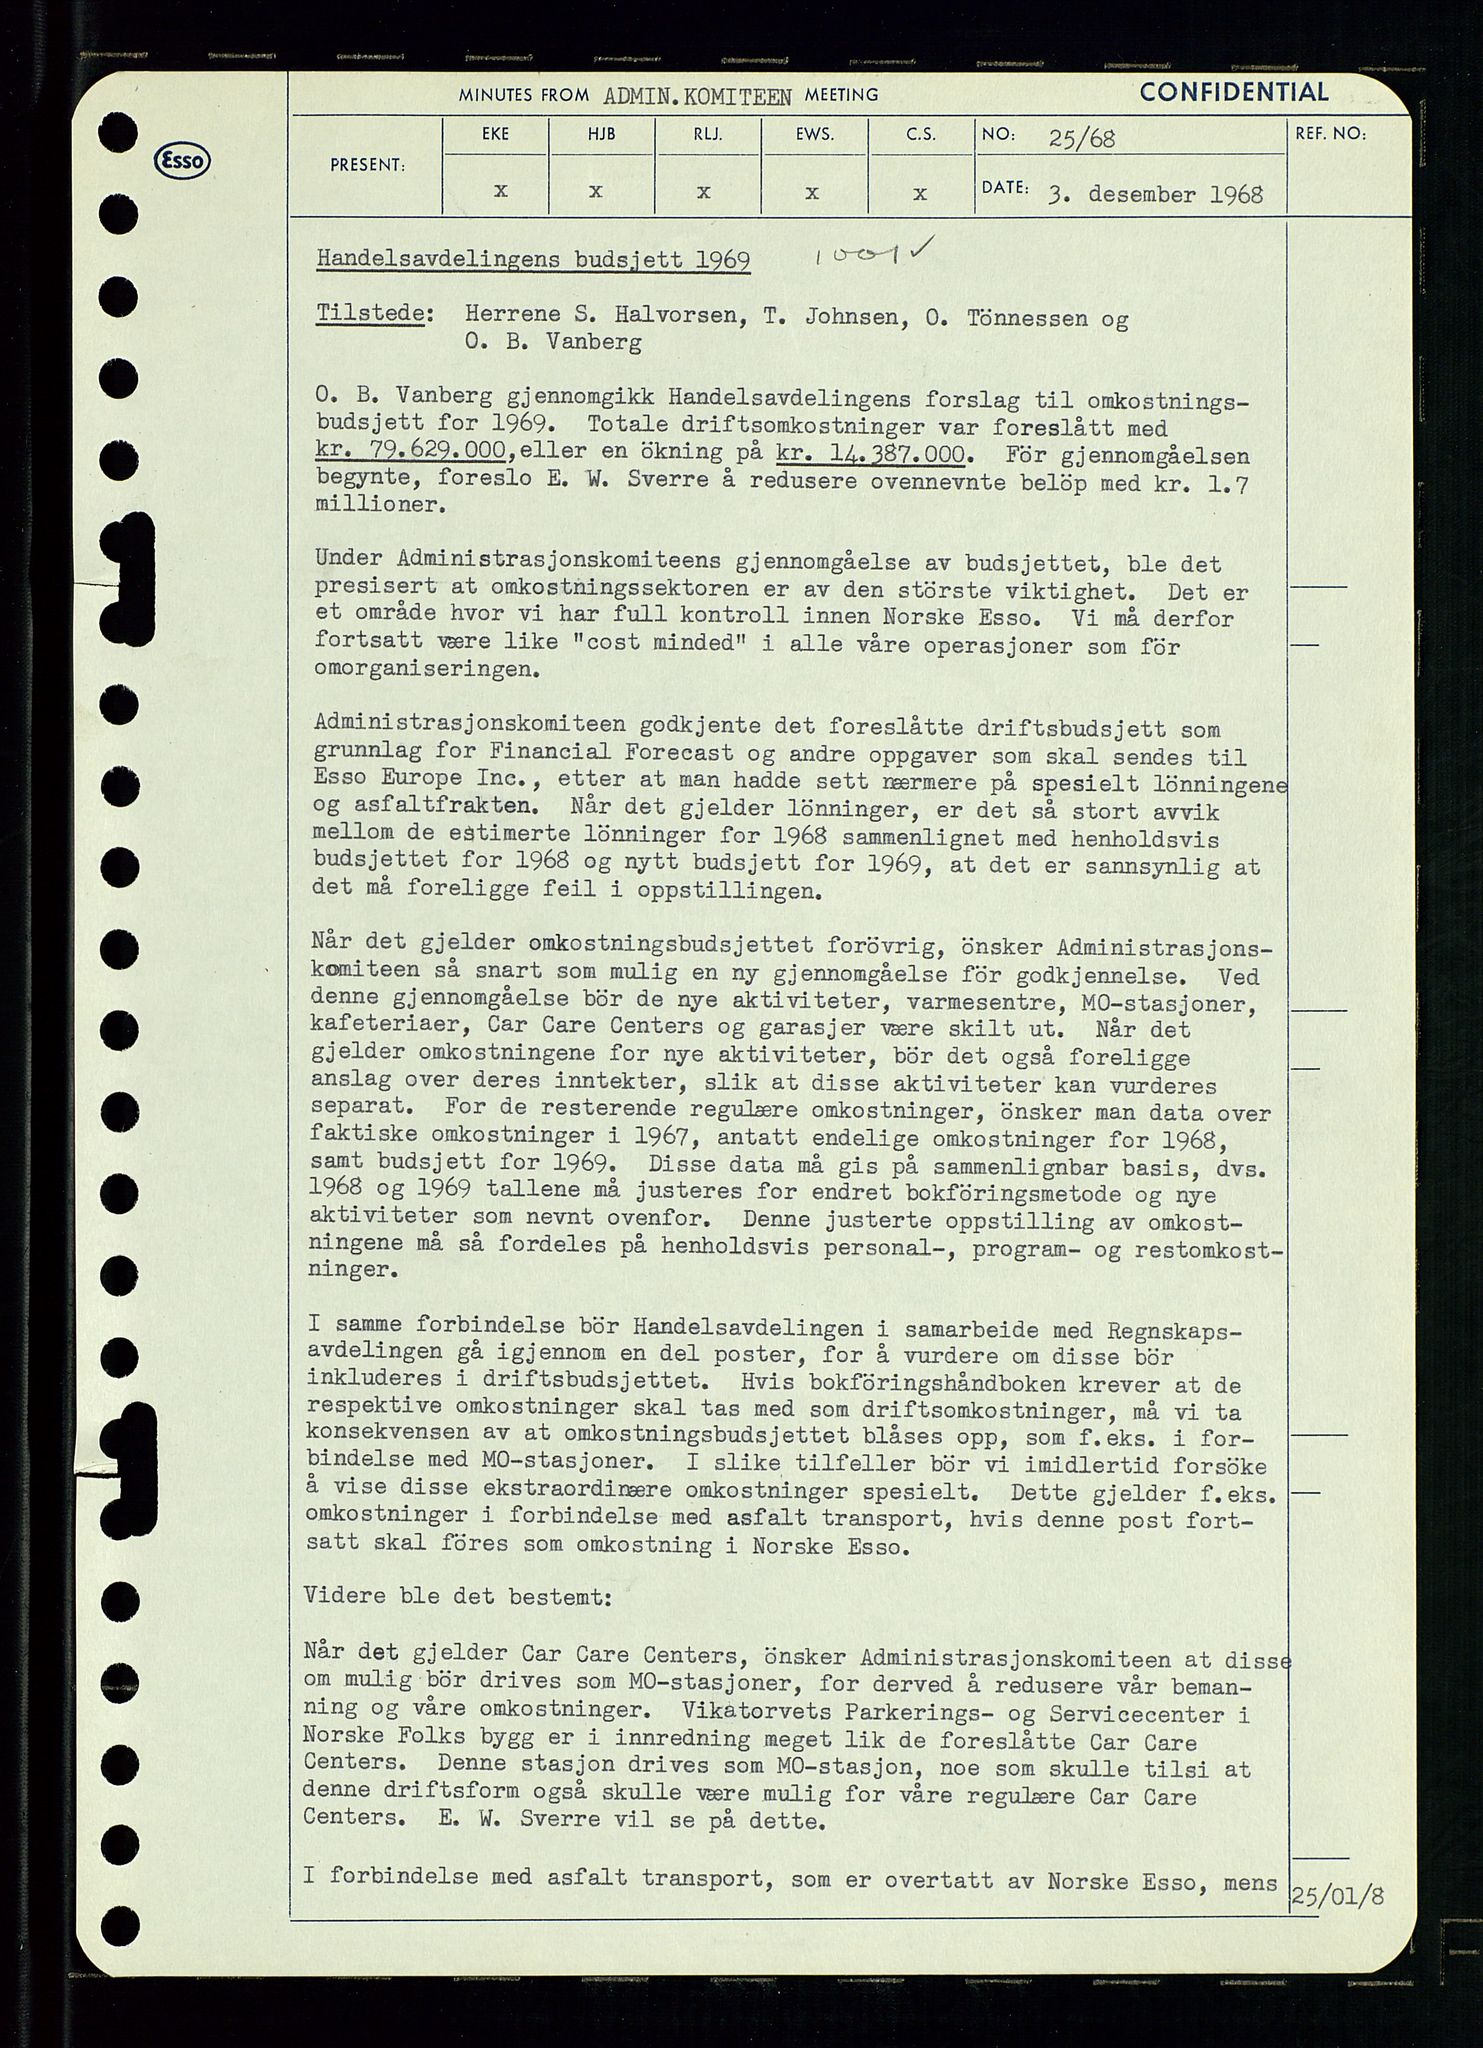 Pa 0982 - Esso Norge A/S, SAST/A-100448/A/Aa/L0002/0004: Den administrerende direksjon Board minutes (styrereferater) / Den administrerende direksjon Board minutes (styrereferater), 1968, s. 109